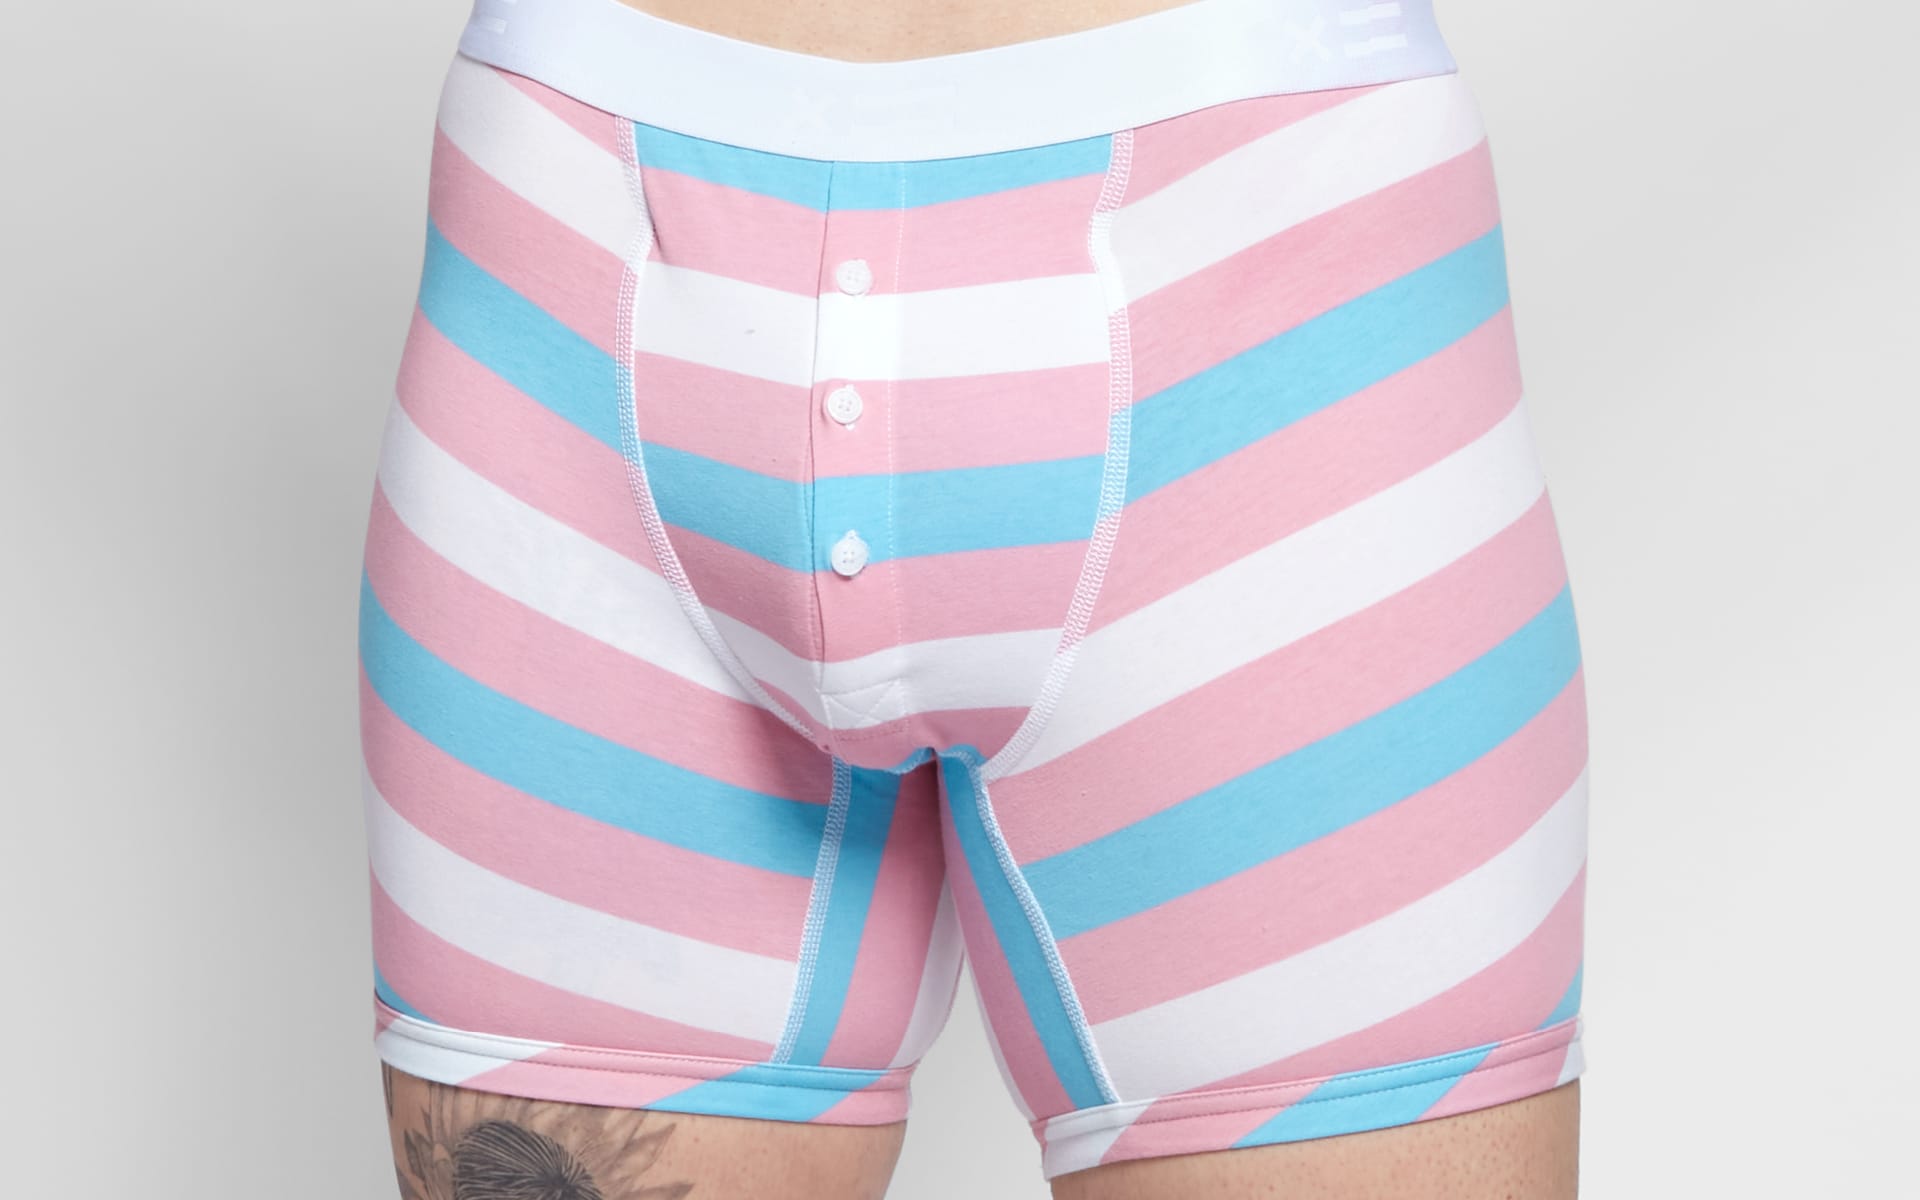 TomboyX 6" Fly Packing Boxer Briefs - Trans Pride Stripes